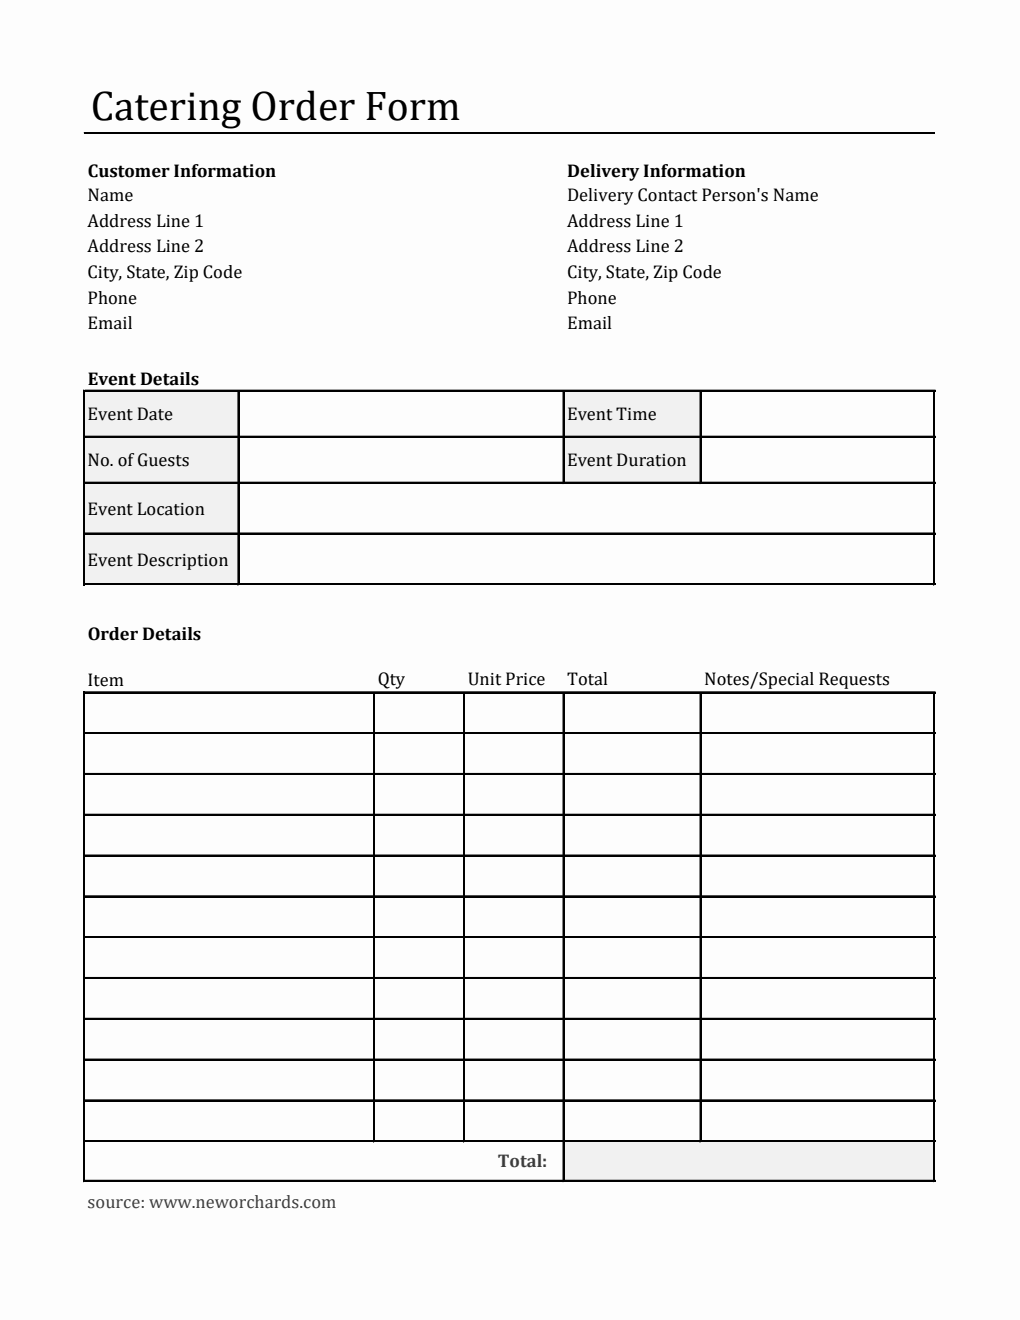 Editable Catering Order Form Template in Excel